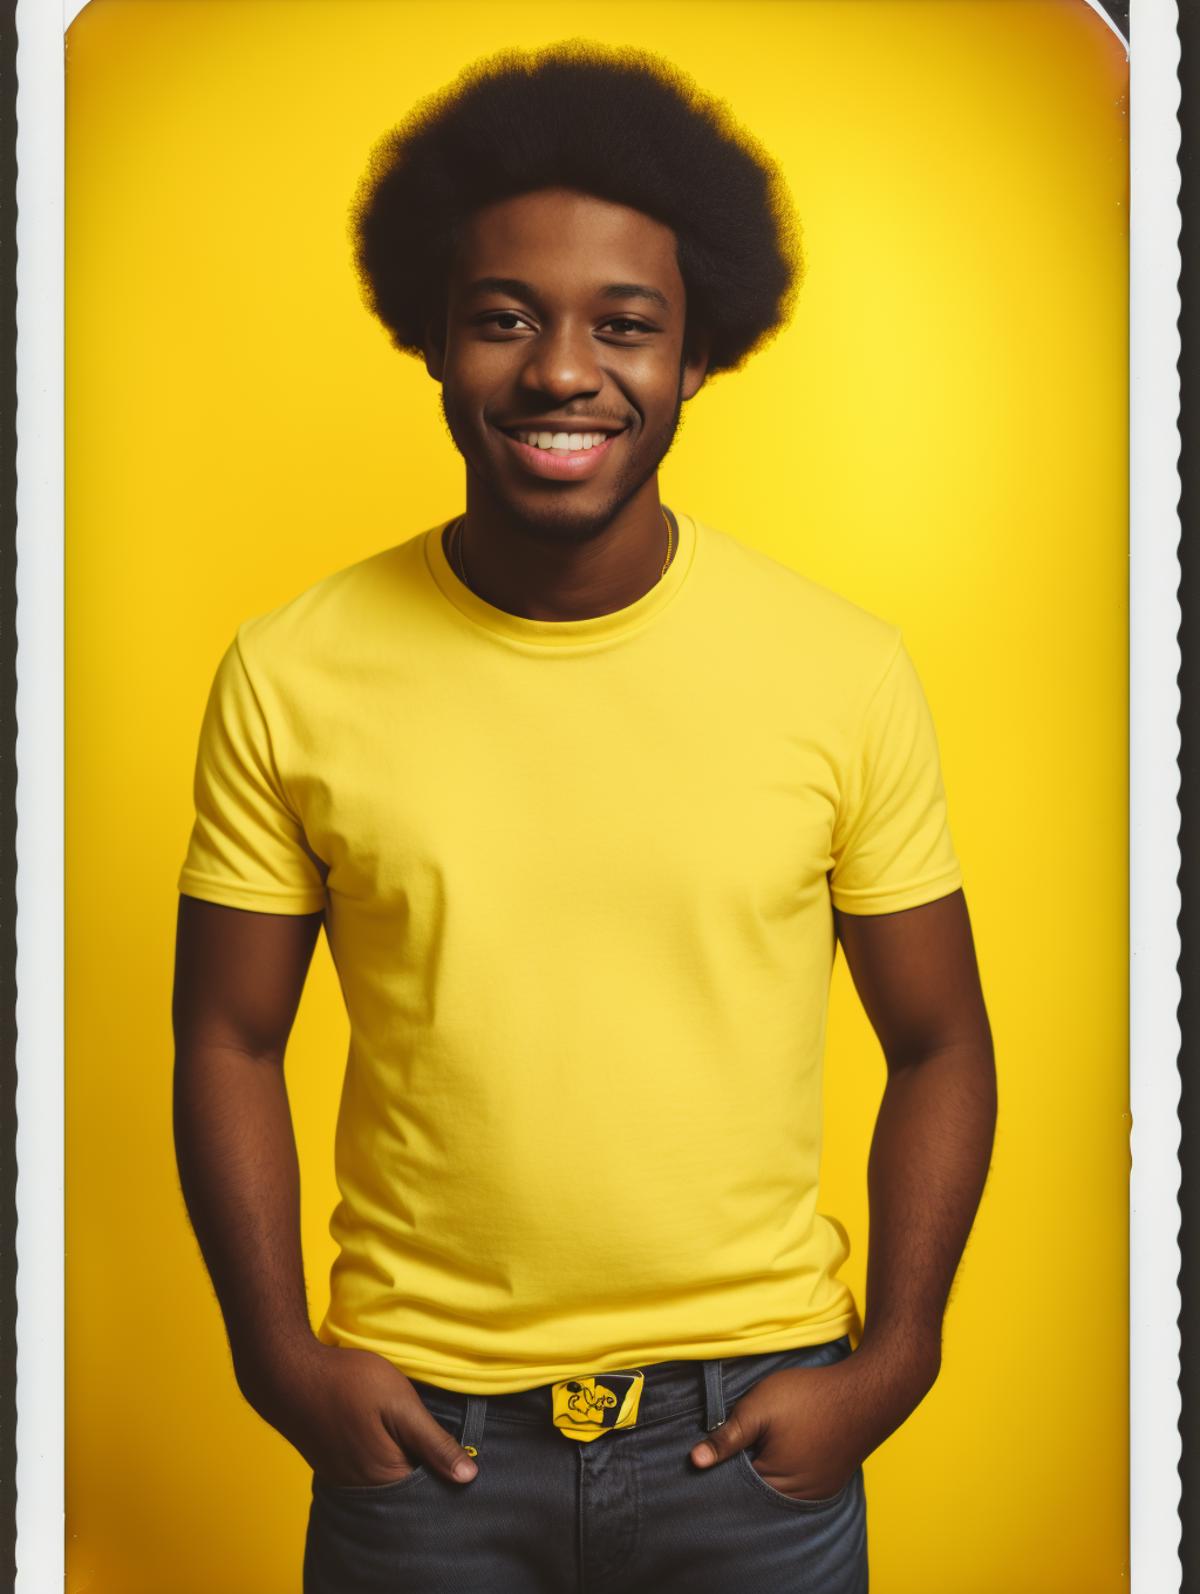 Black man with afro, wearing a yellow shirt, jeans, smiling, portrait, yellow background, polaroid filter